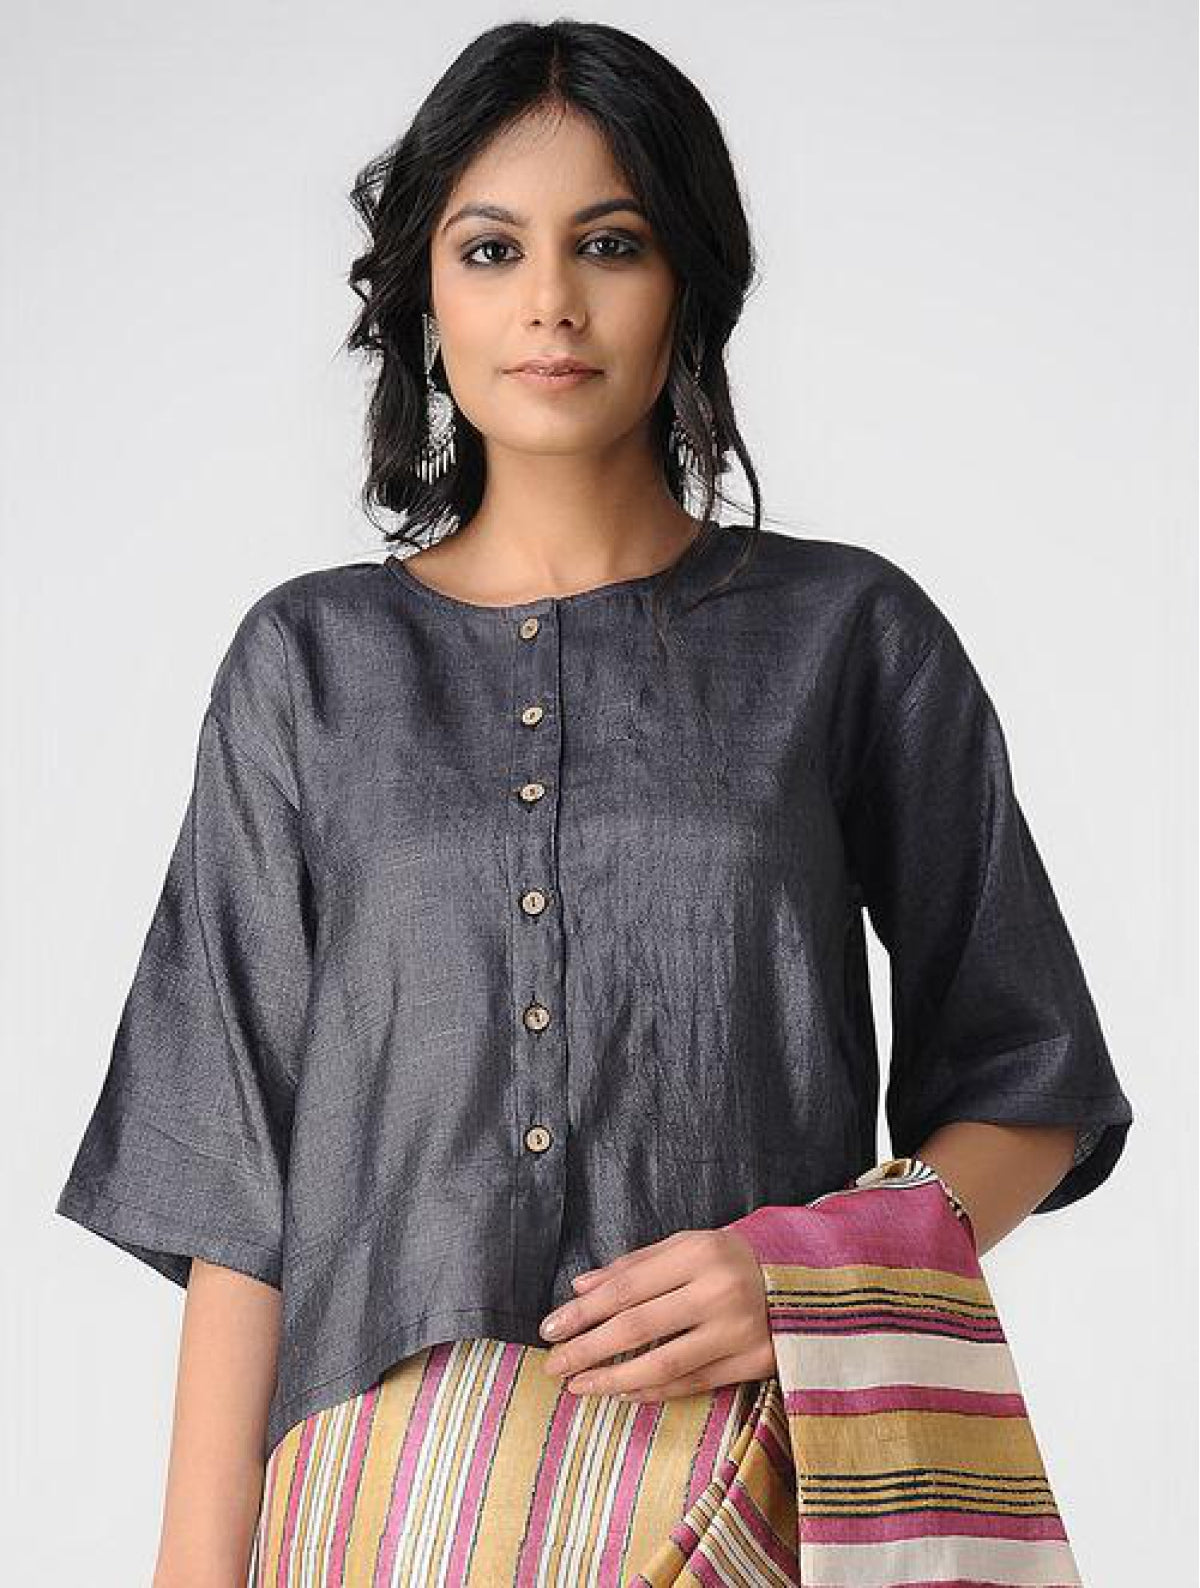 Black Tussar Blouse With Wooden Button